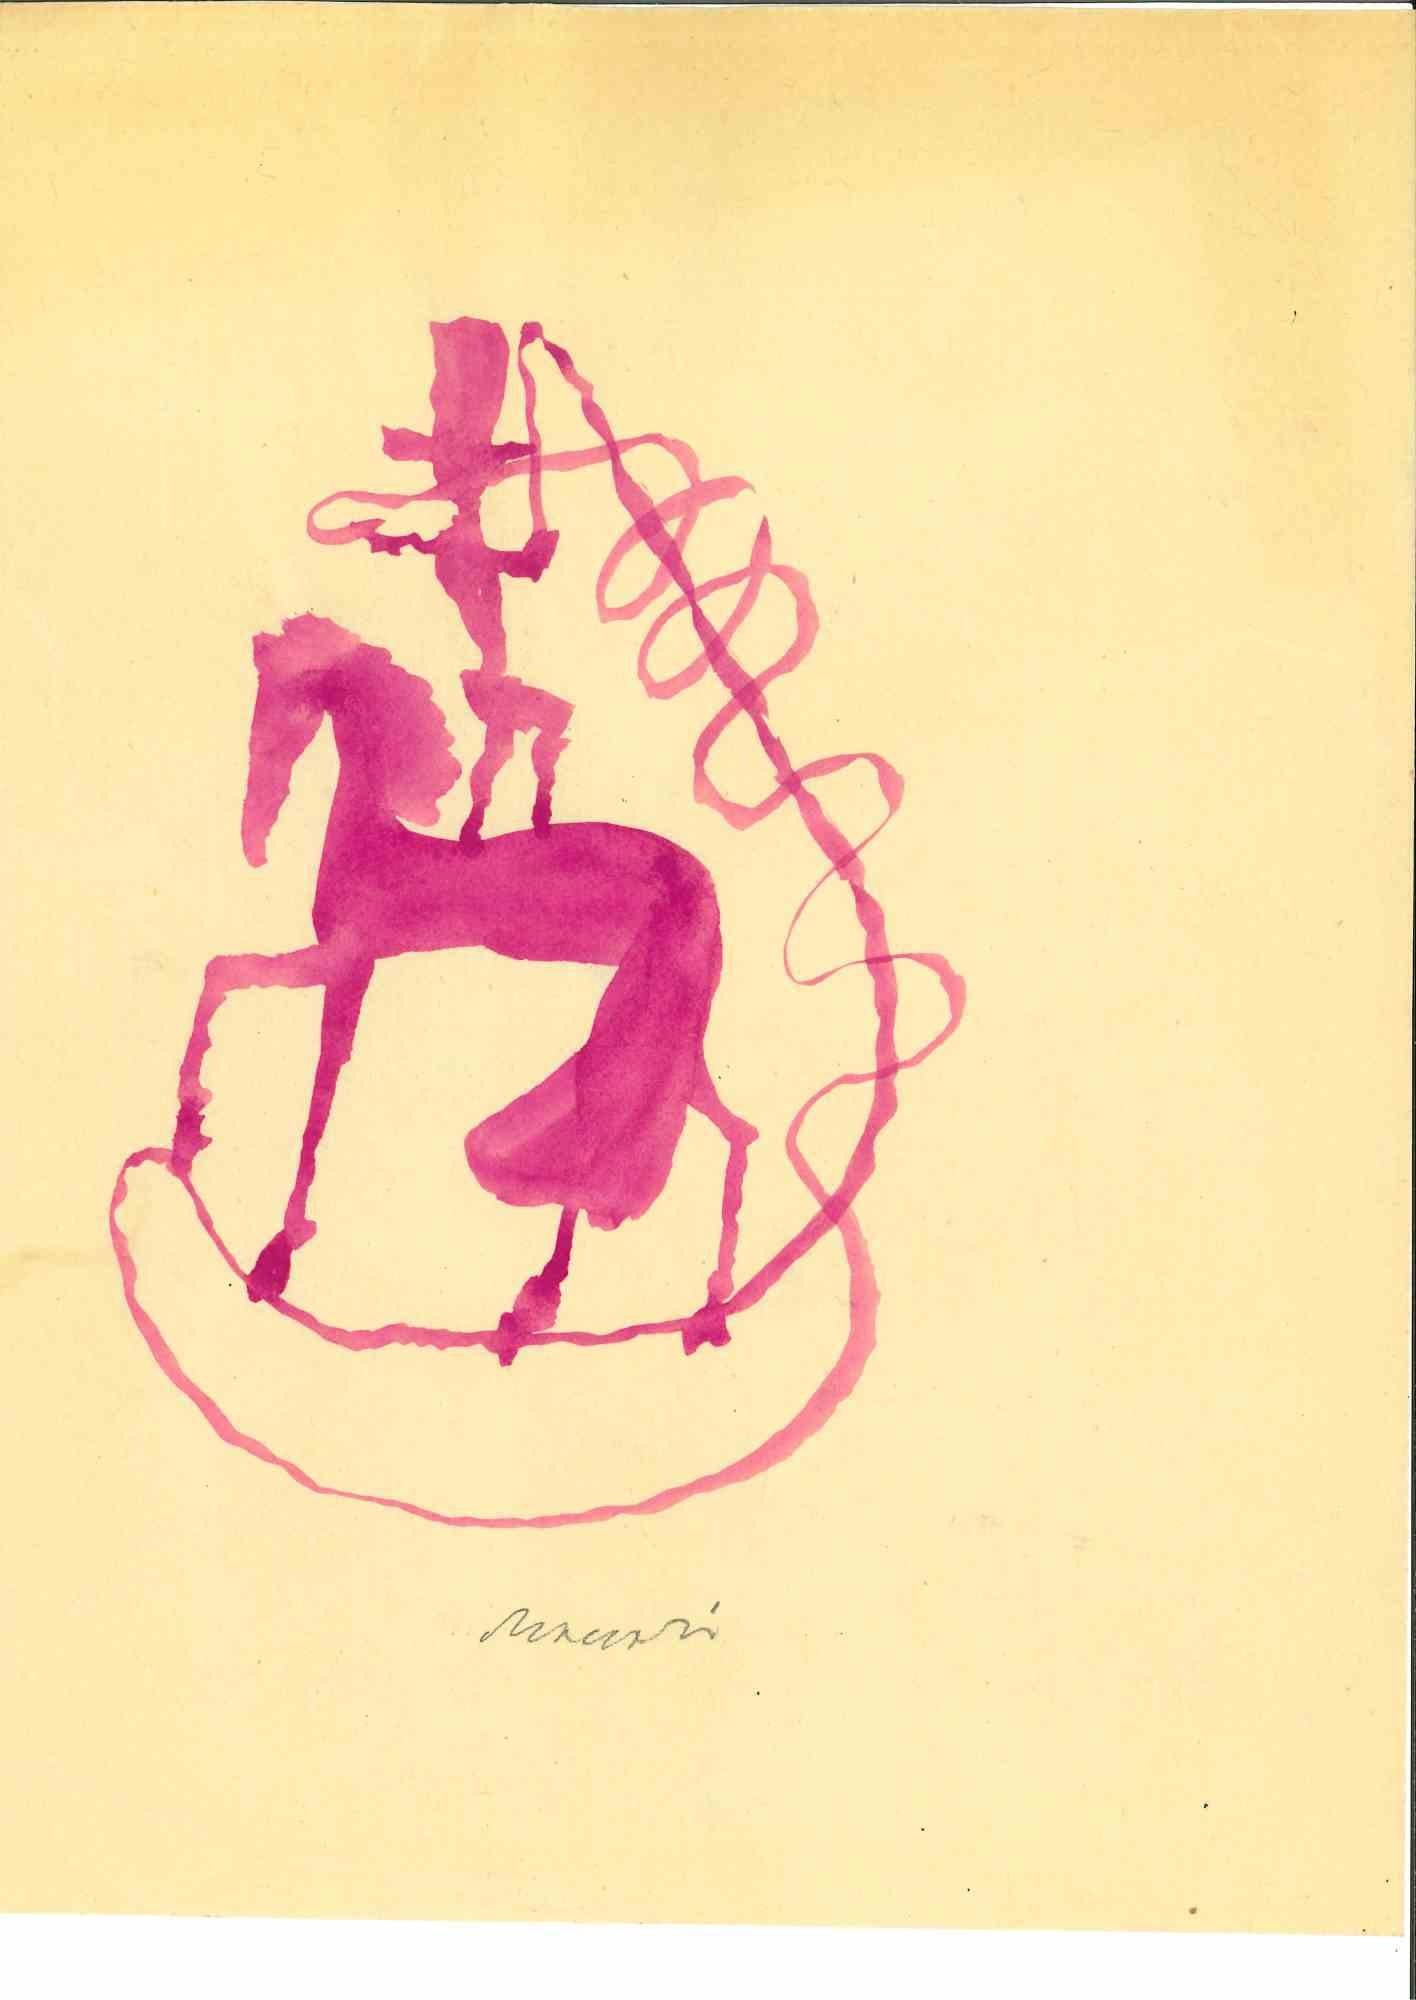 The Equilibrist is a Watercolor Drawing realized by Mino Maccari  (1924-1989) in the Mid-20th Century.

Hand-signed on the lower.

Good conditions.

Mino Maccari (Siena, 1924-Rome, June 16, 1989) was an Italian writer, painter, engraver and